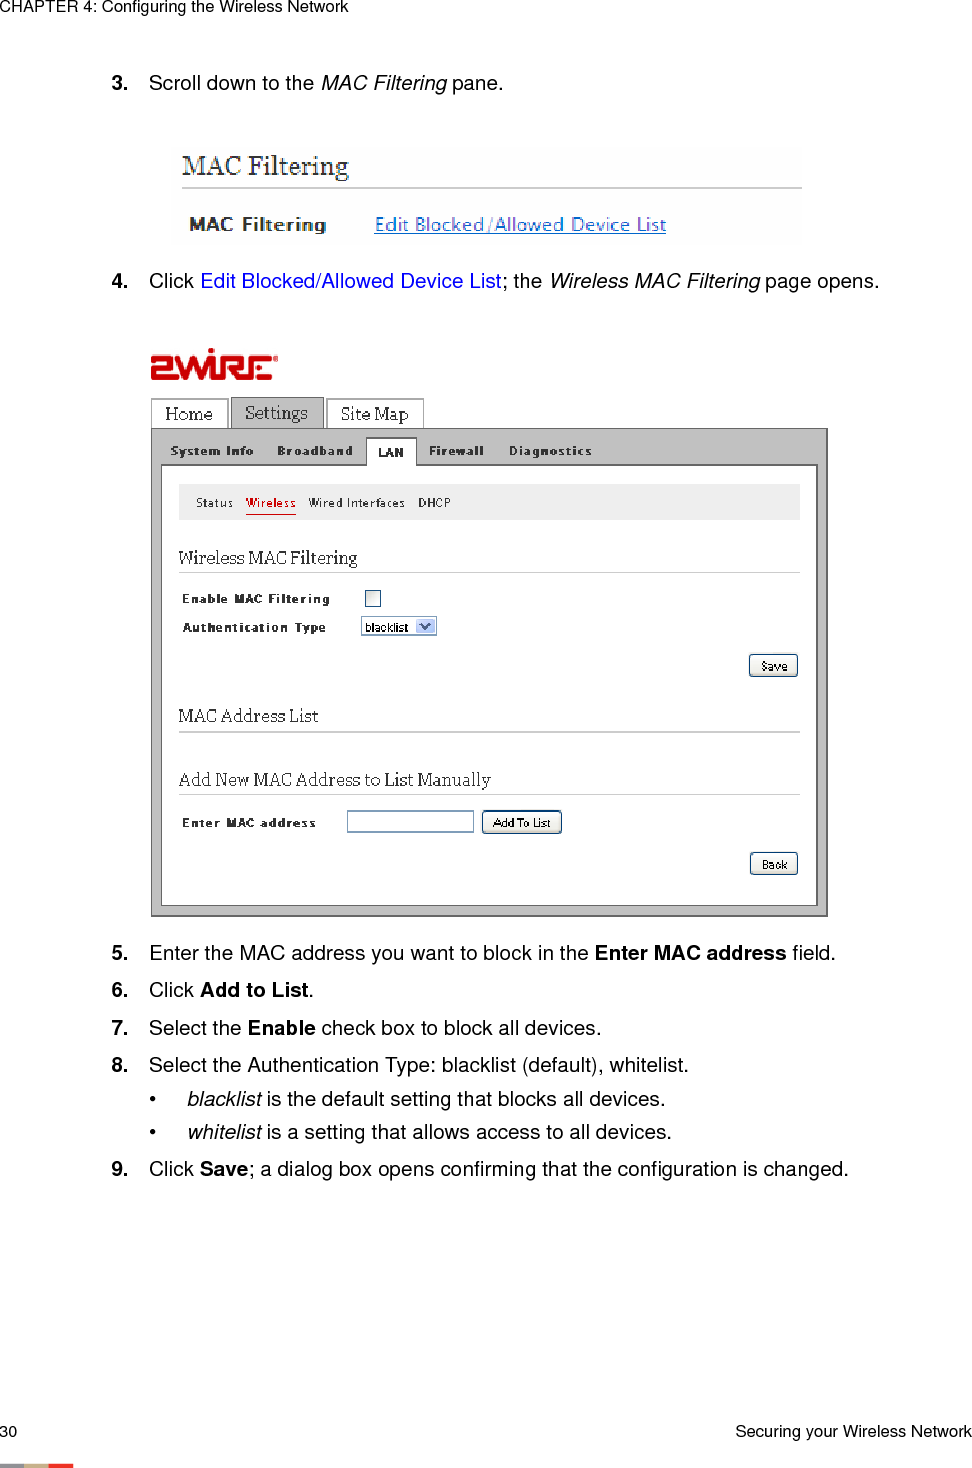 CHAPTER 4: Configuring the Wireless Network30 Securing your Wireless Network3. Scroll down to the MAC Filtering pane.4. Click Edit Blocked/Allowed Device List; the Wireless MAC Filtering page opens. 5. Enter the MAC address you want to block in the Enter MAC address field. 6. Click Add to List. 7. Select the Enable check box to block all devices. 8. Select the Authentication Type: blacklist (default), whitelist.•blacklist is the default setting that blocks all devices.•whitelist is a setting that allows access to all devices.9. Click Save; a dialog box opens confirming that the configuration is changed. 